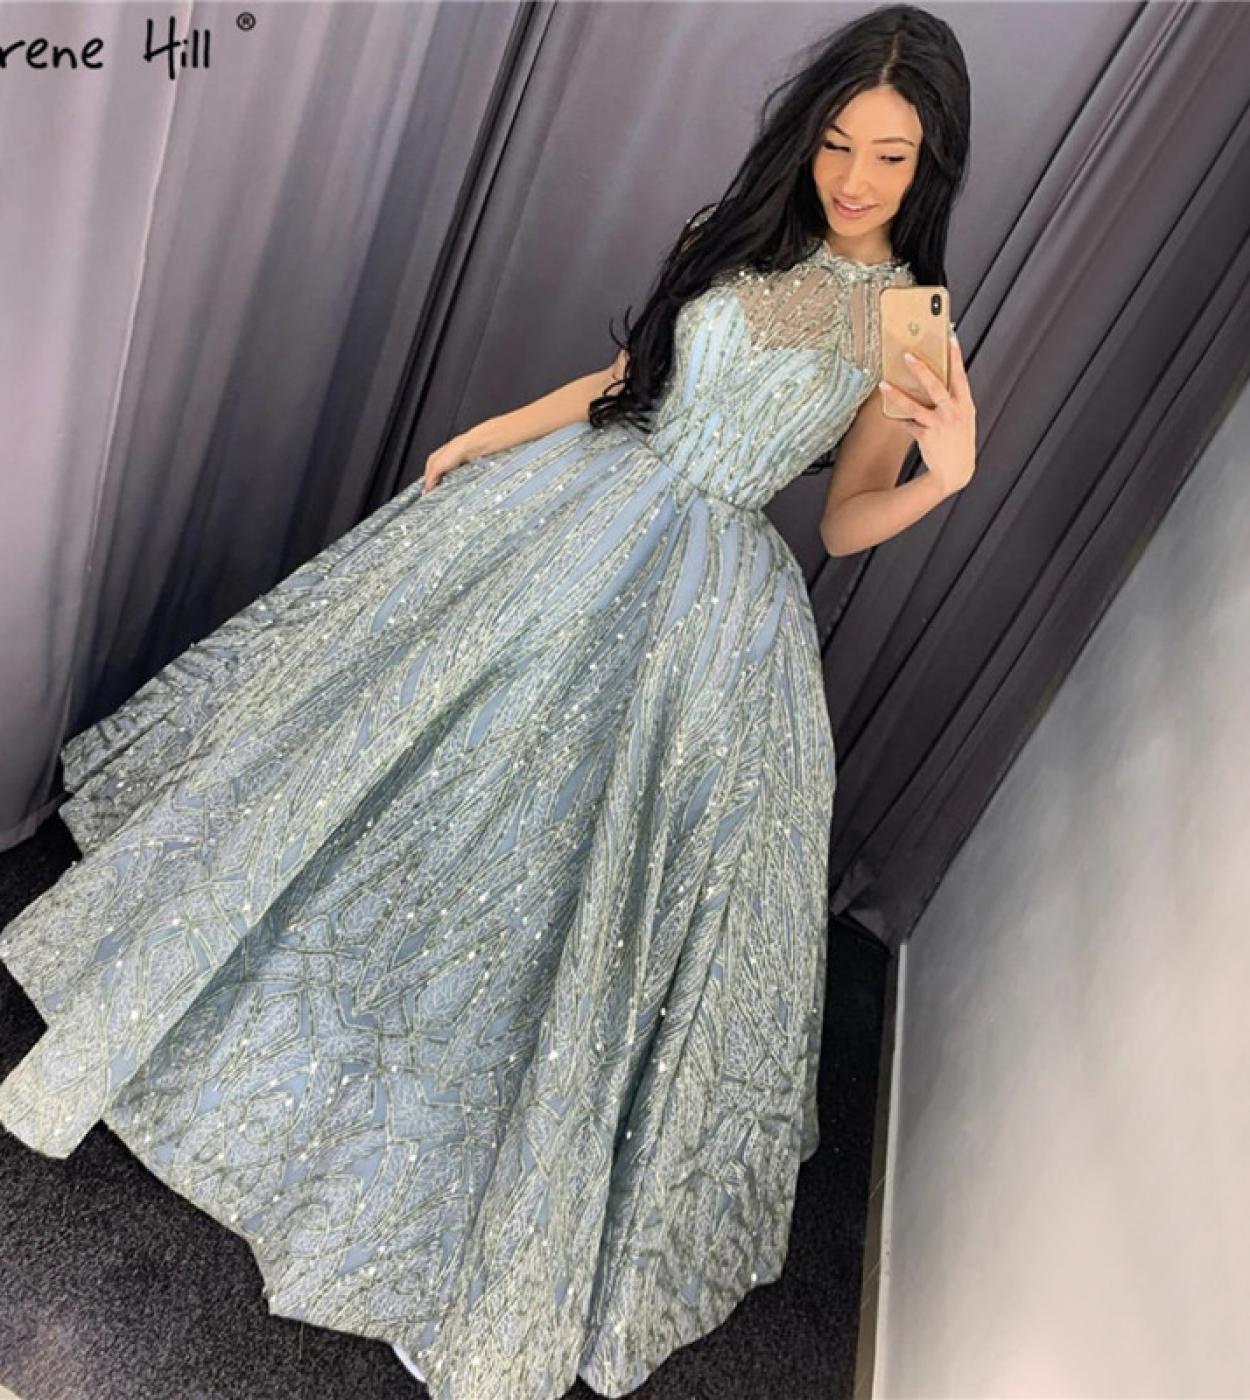 Clear Water Blue High Collar Evening Dresses  Short Sleeve Lace Sequined Bridal Gowns Design Real Photo Hm66981  Evening